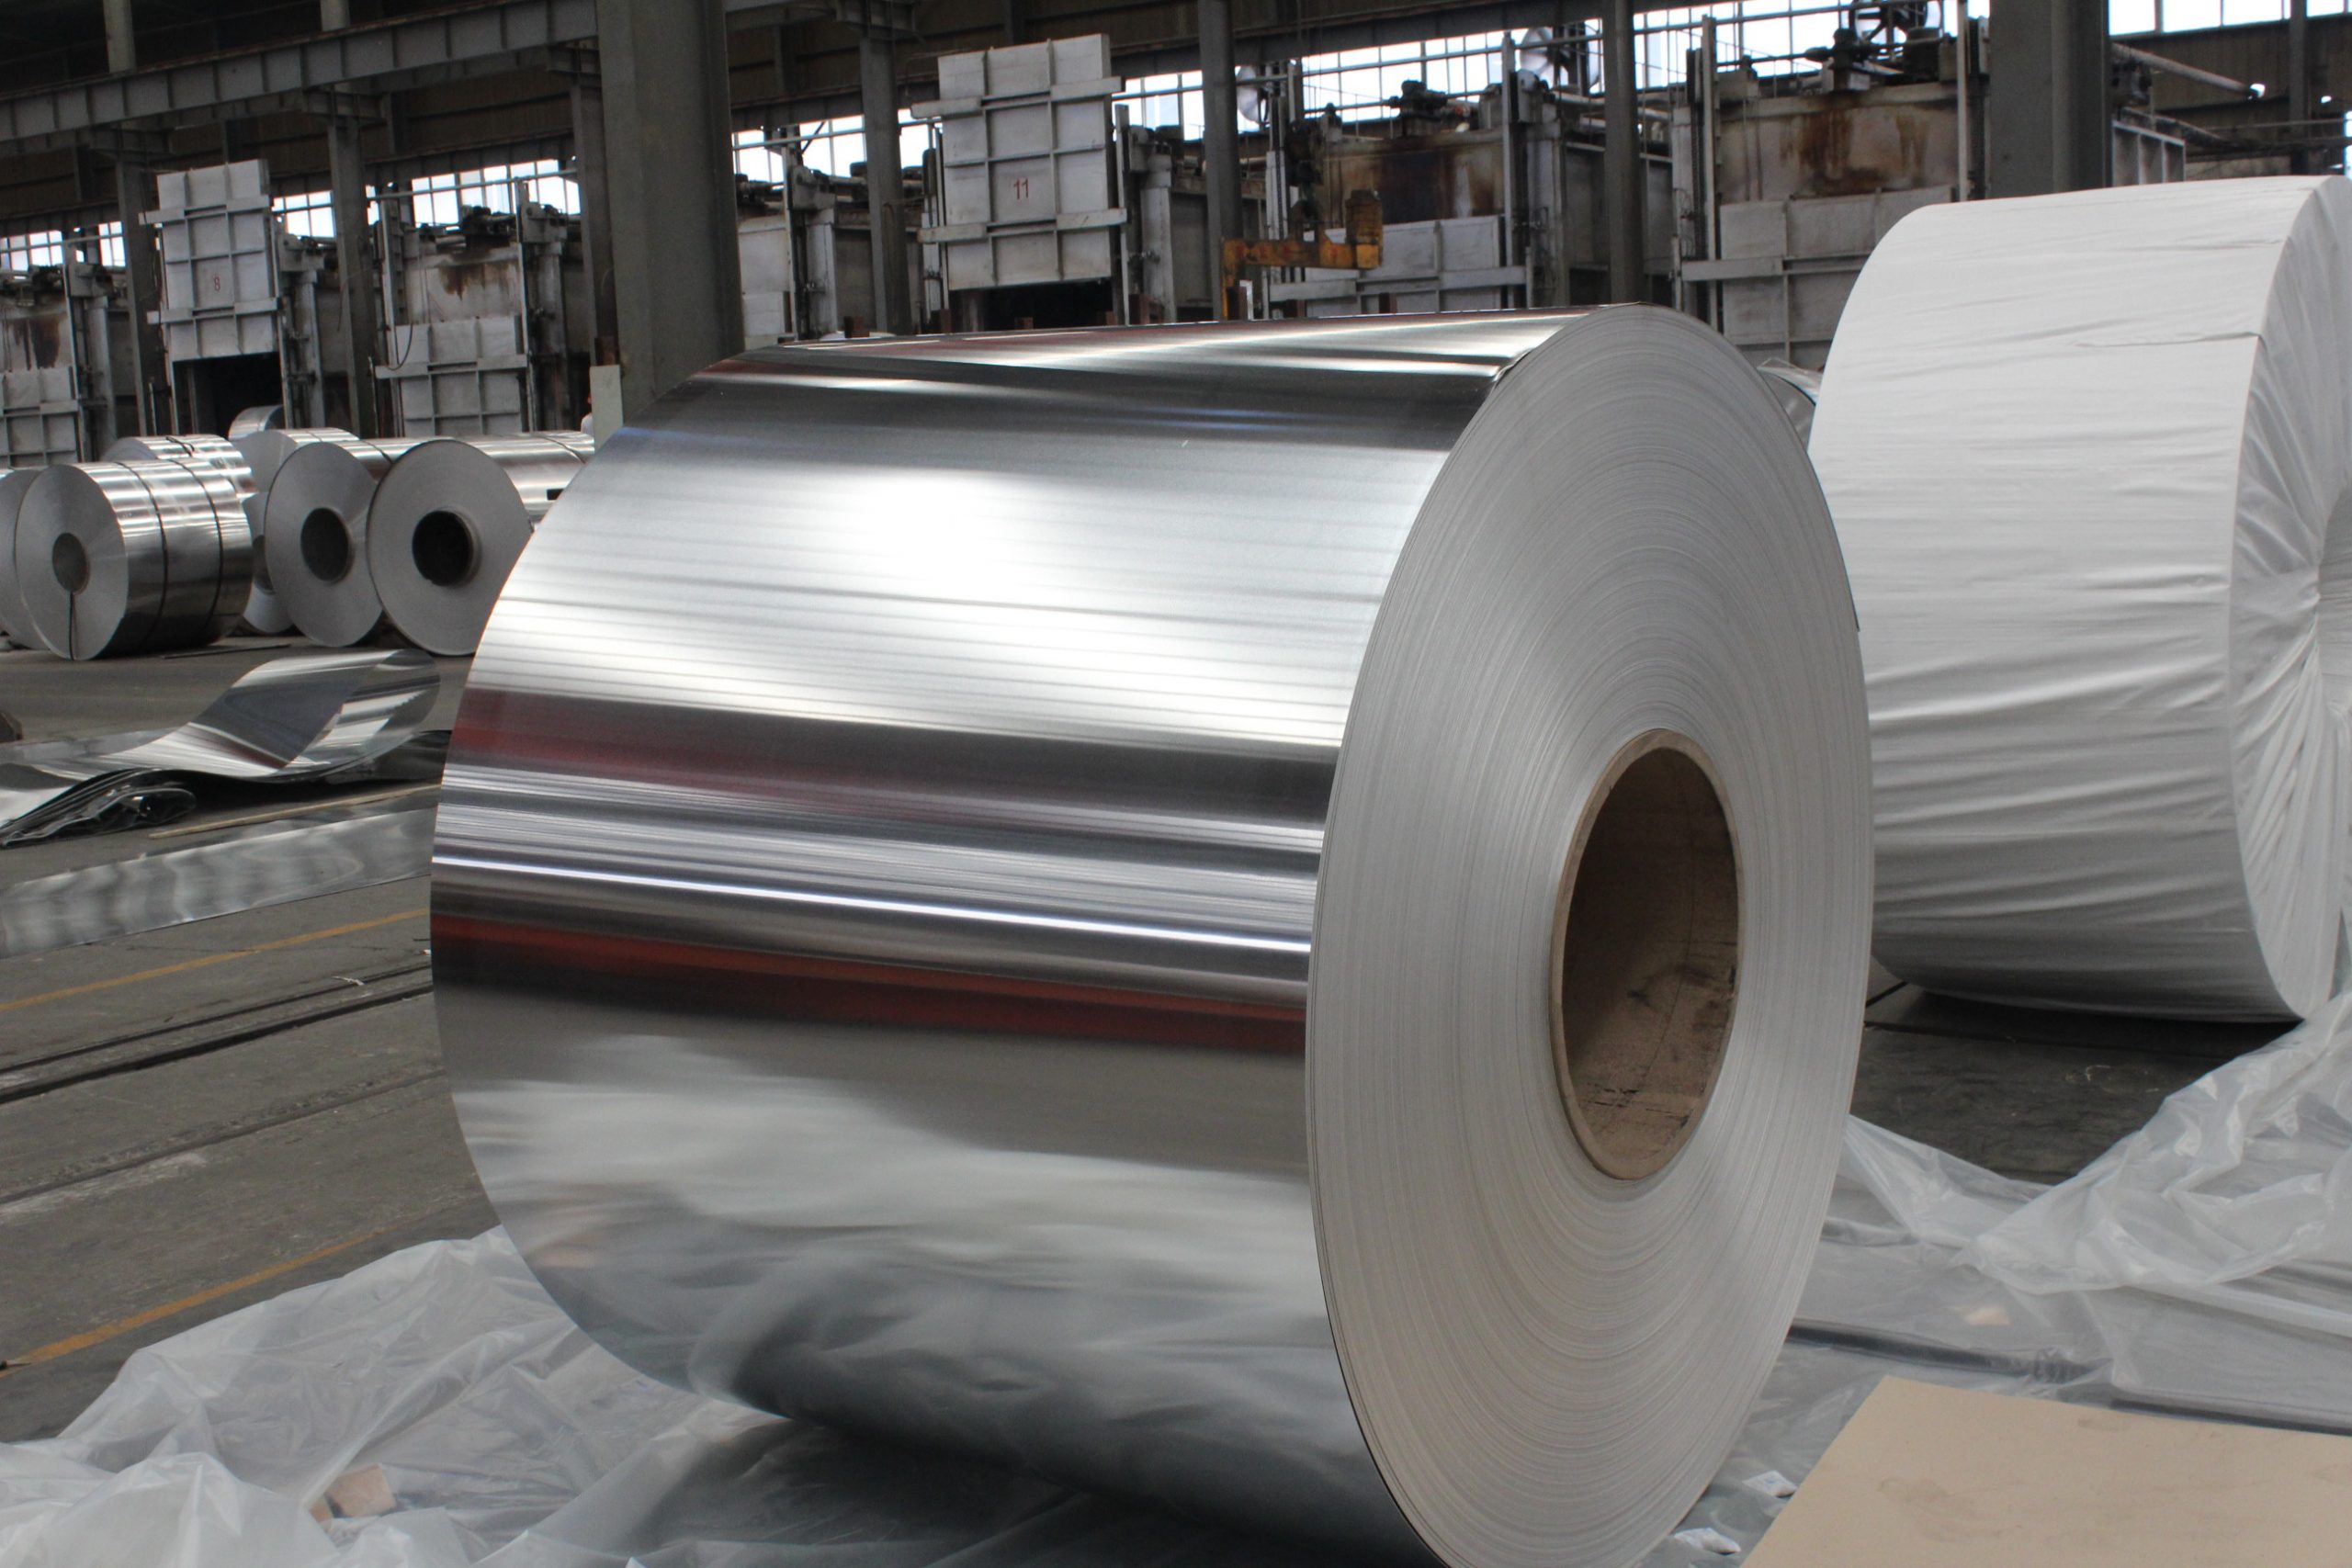 Anti-Corrosion Aluminum Coil Stock Thickness, Silver Insulation Material